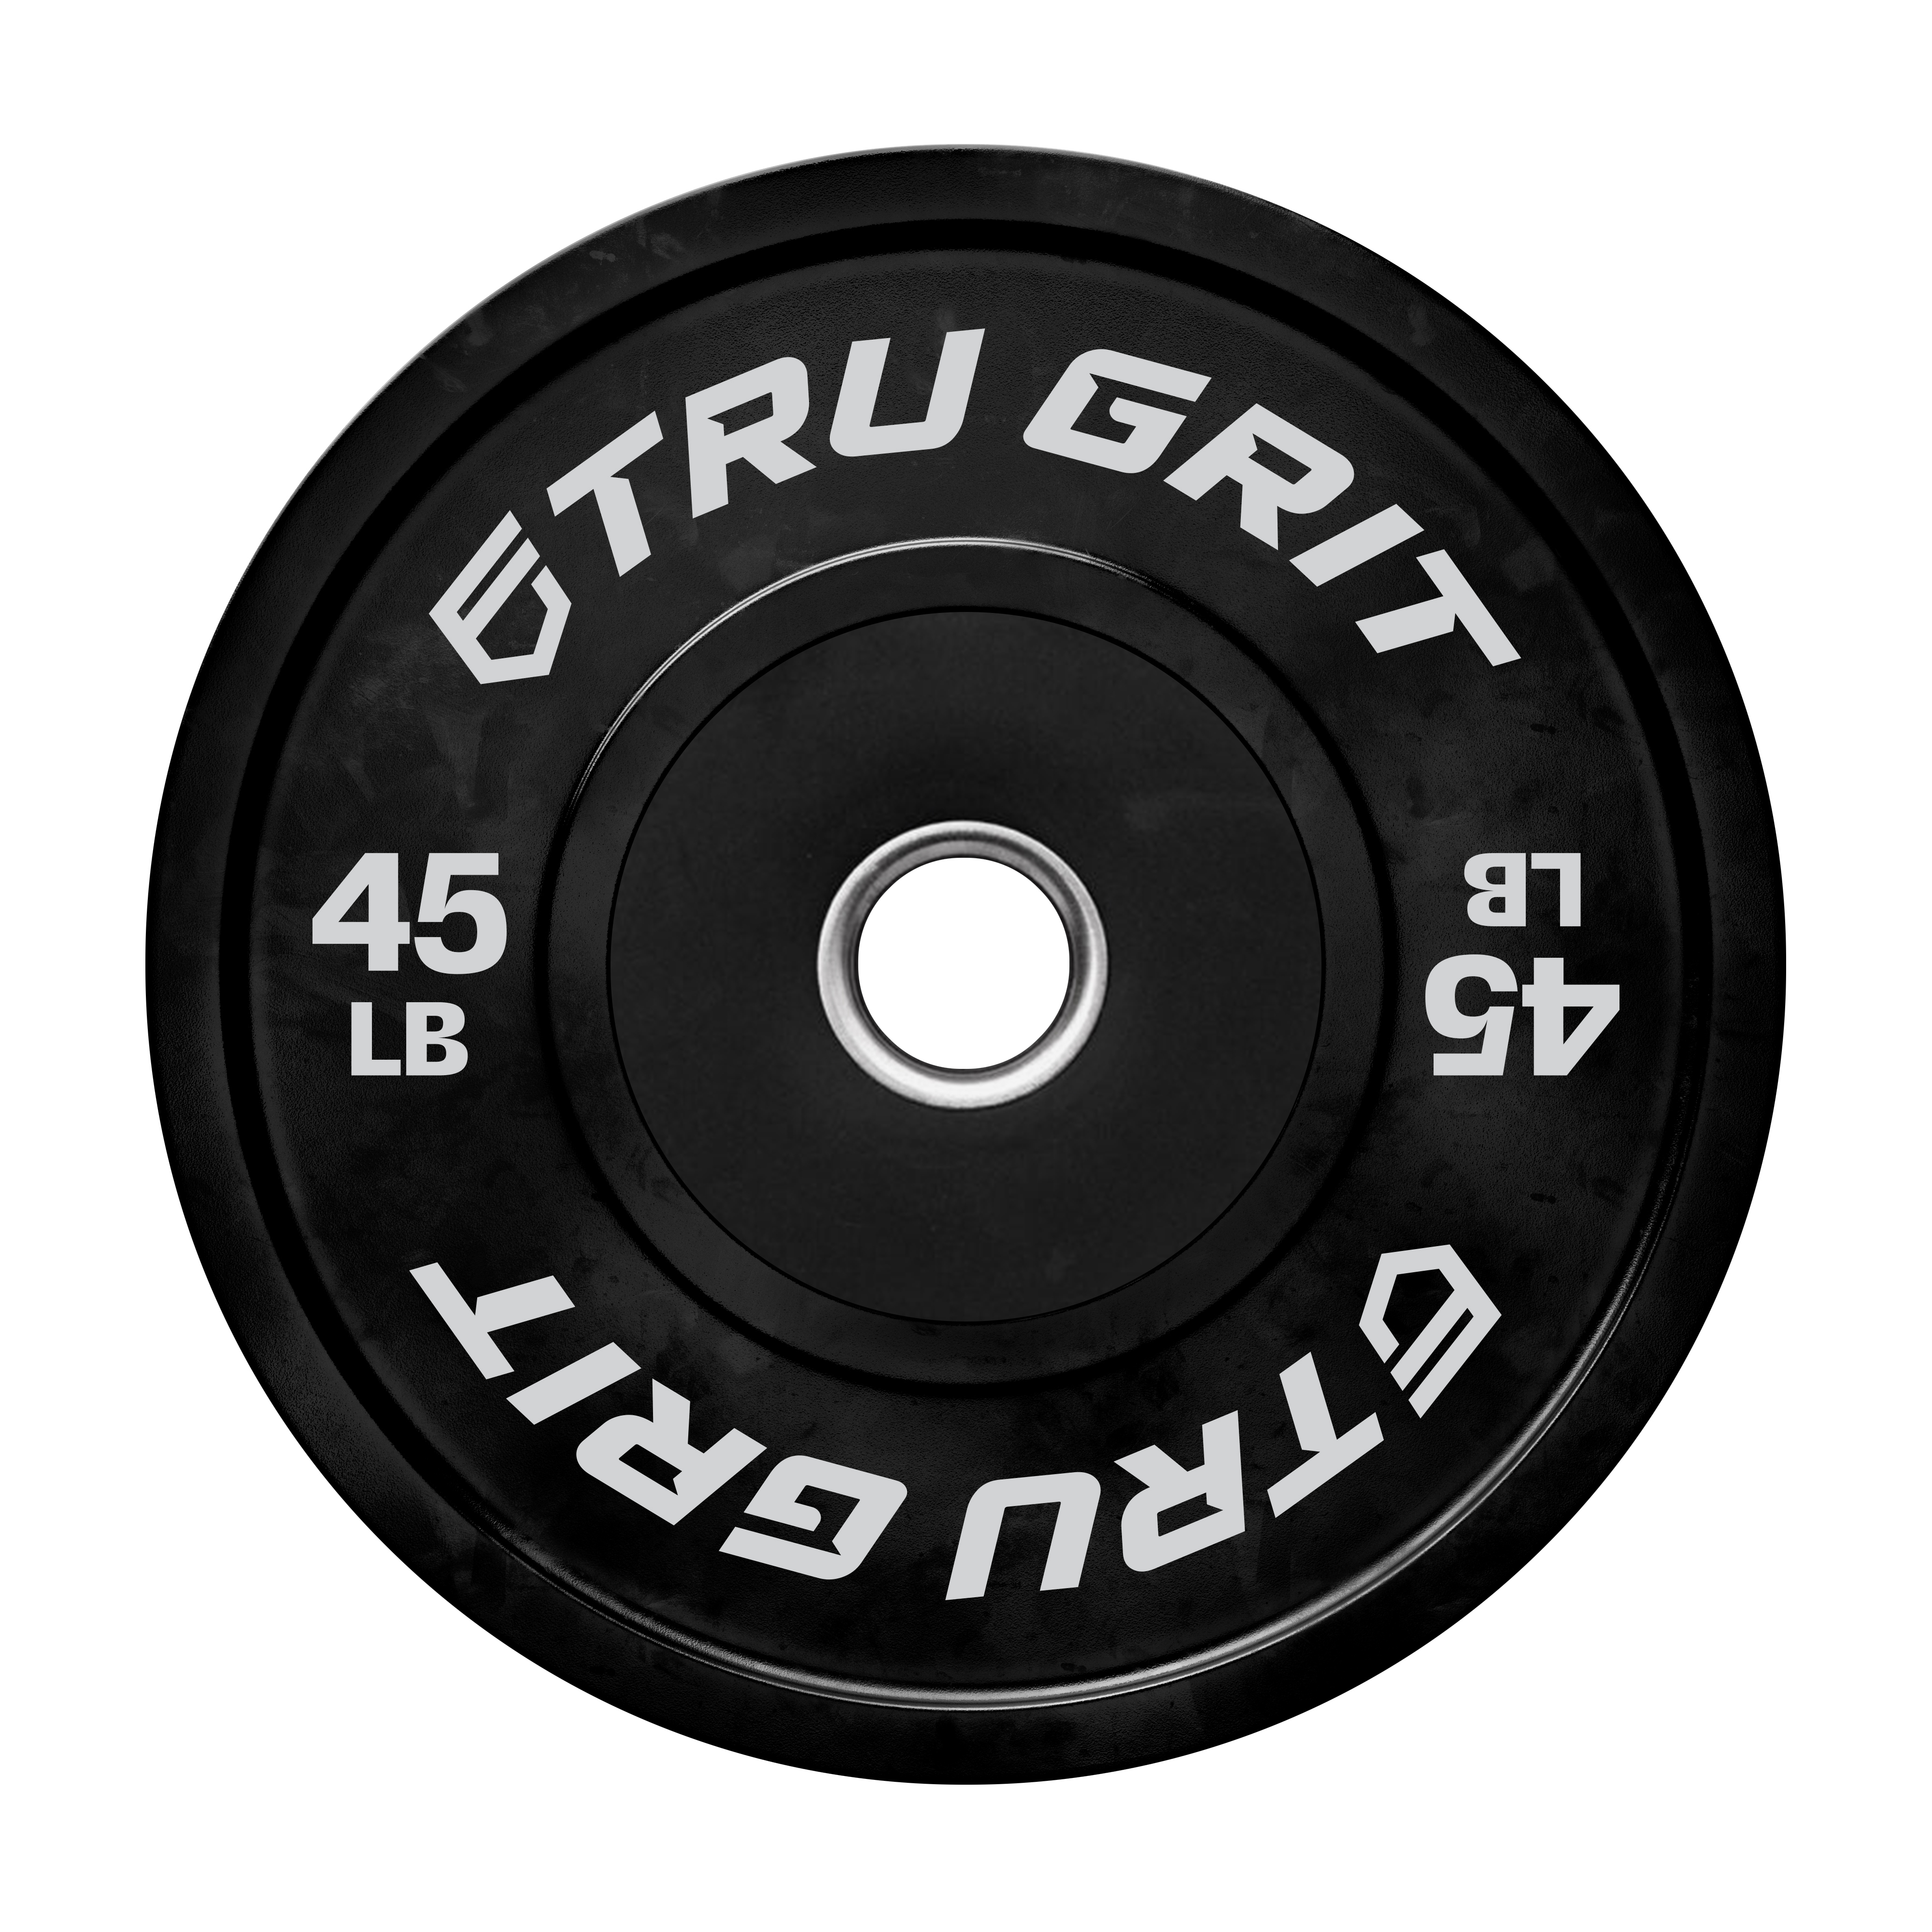 Tru Grit Fitness 45 lb Black Olympic Bumper Plate Pair Weight Set - image 1 of 9